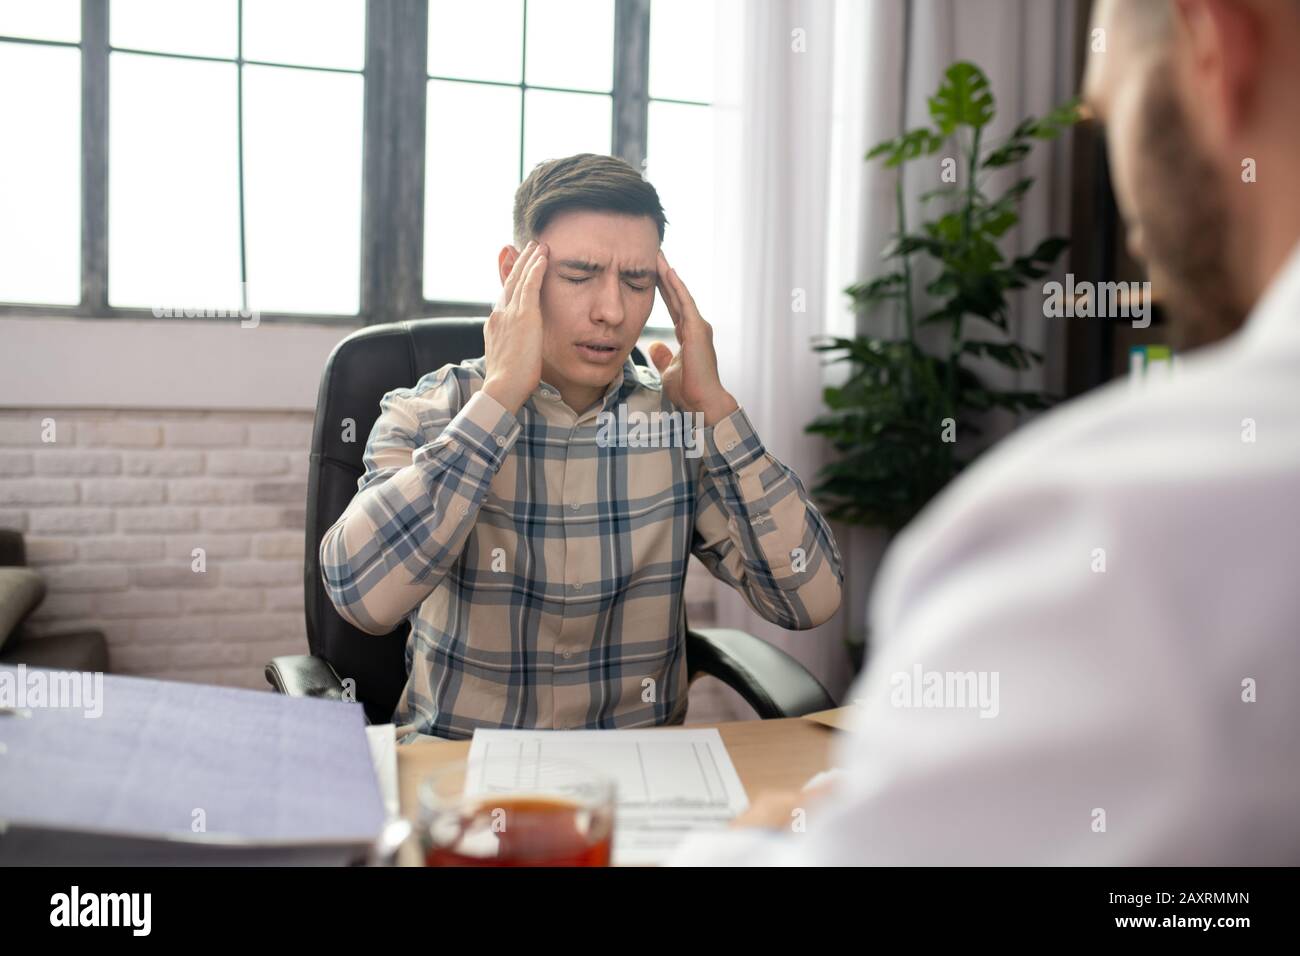 Patient in checkered shirt touching his head and complaining to the doctor Stock Photo